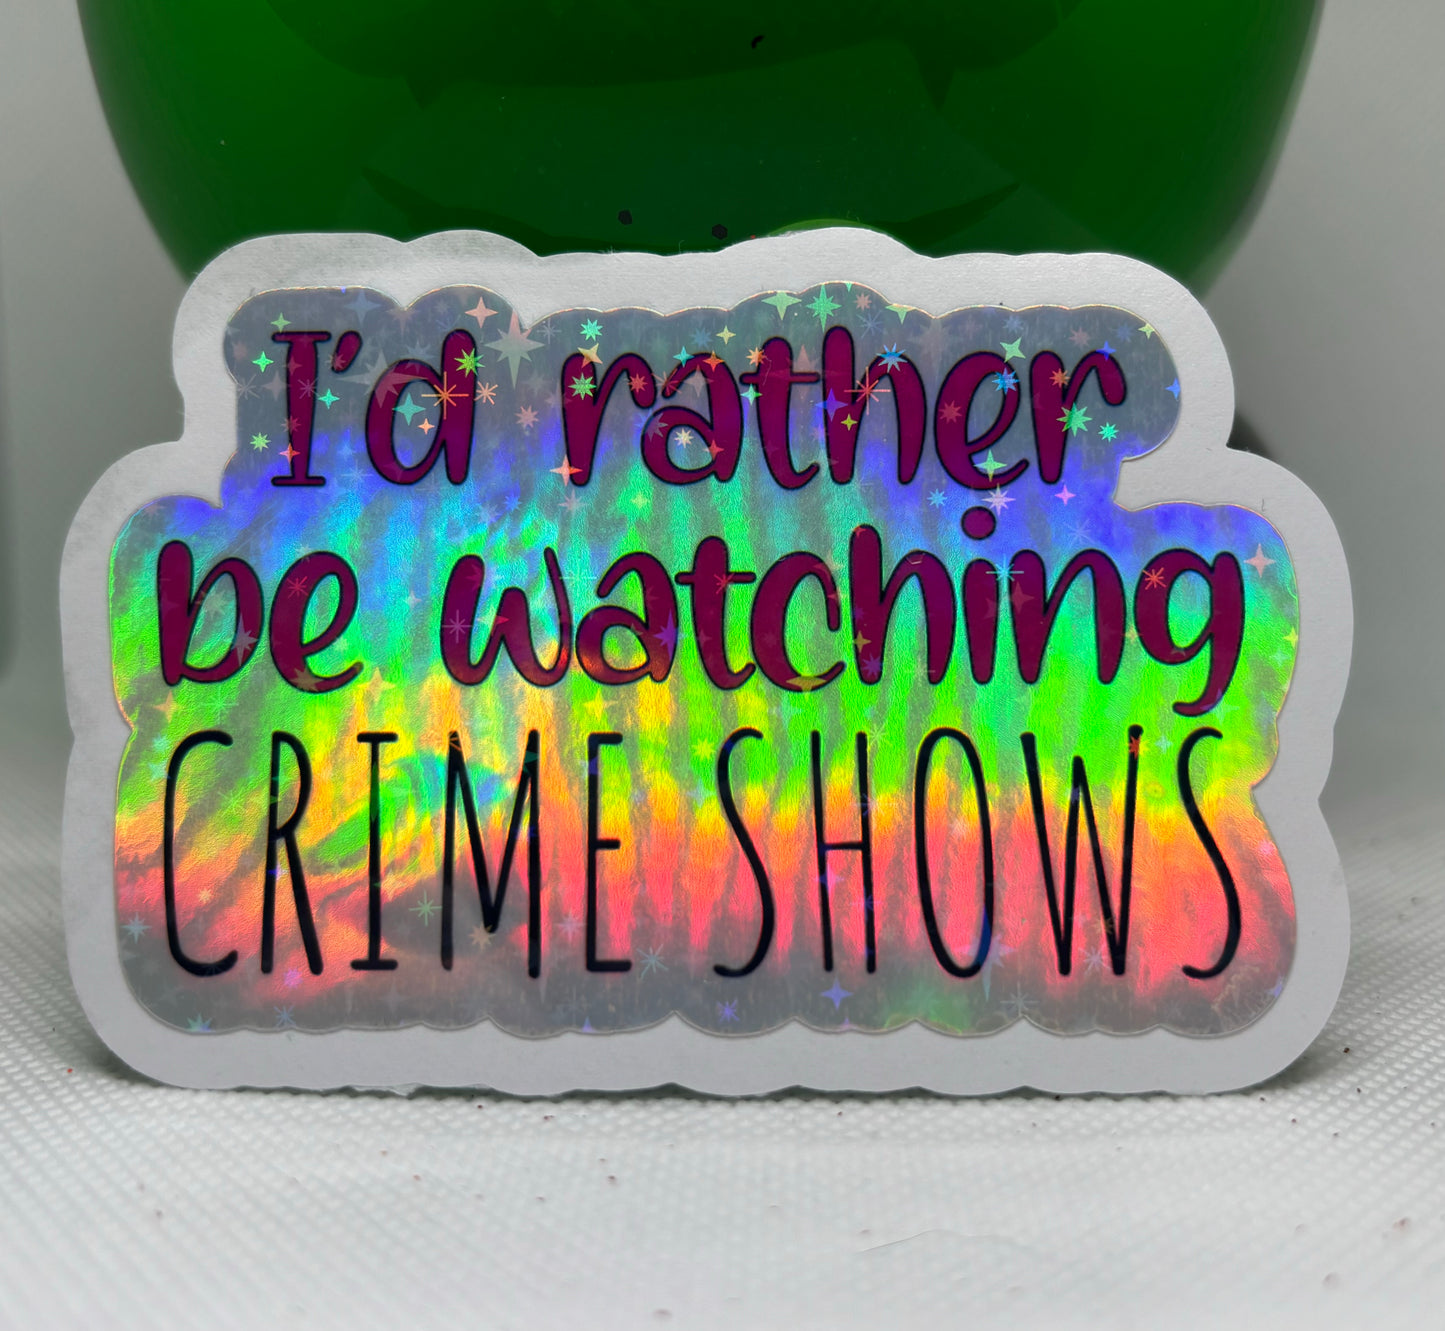 I'd Rather Be Watching Crime Shows Sticker